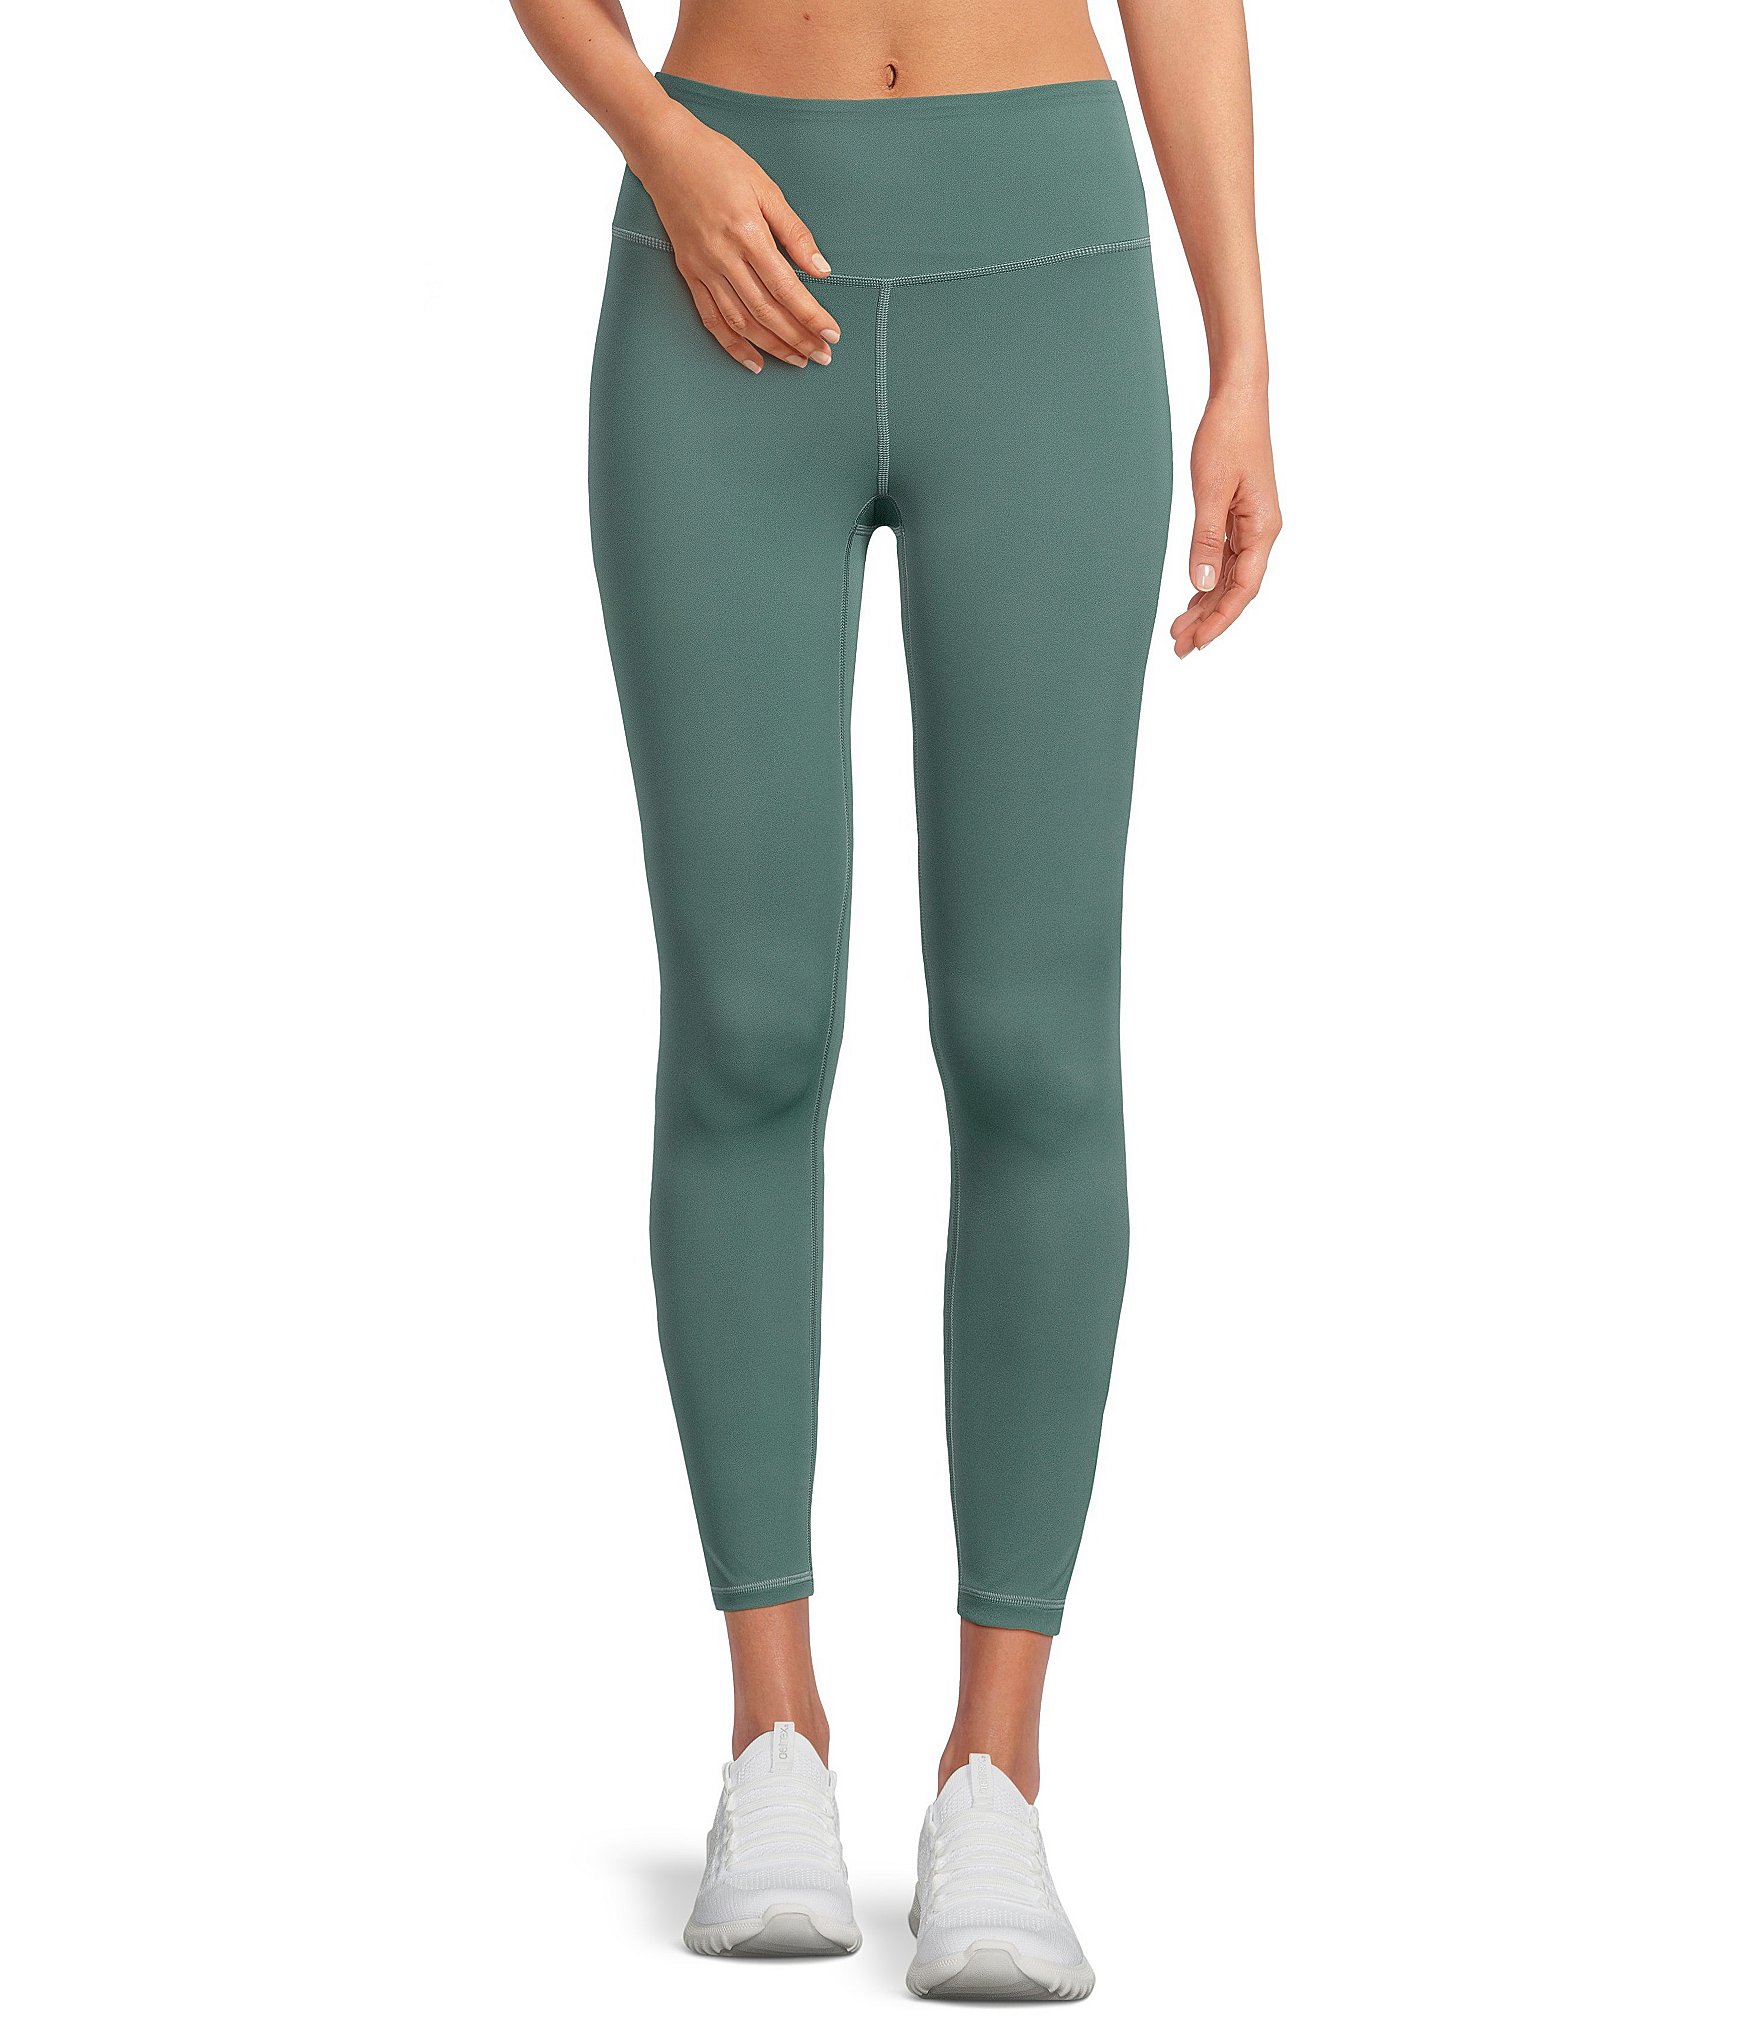 The North Face Motivation Pocket 7/8 Tight - Women's 